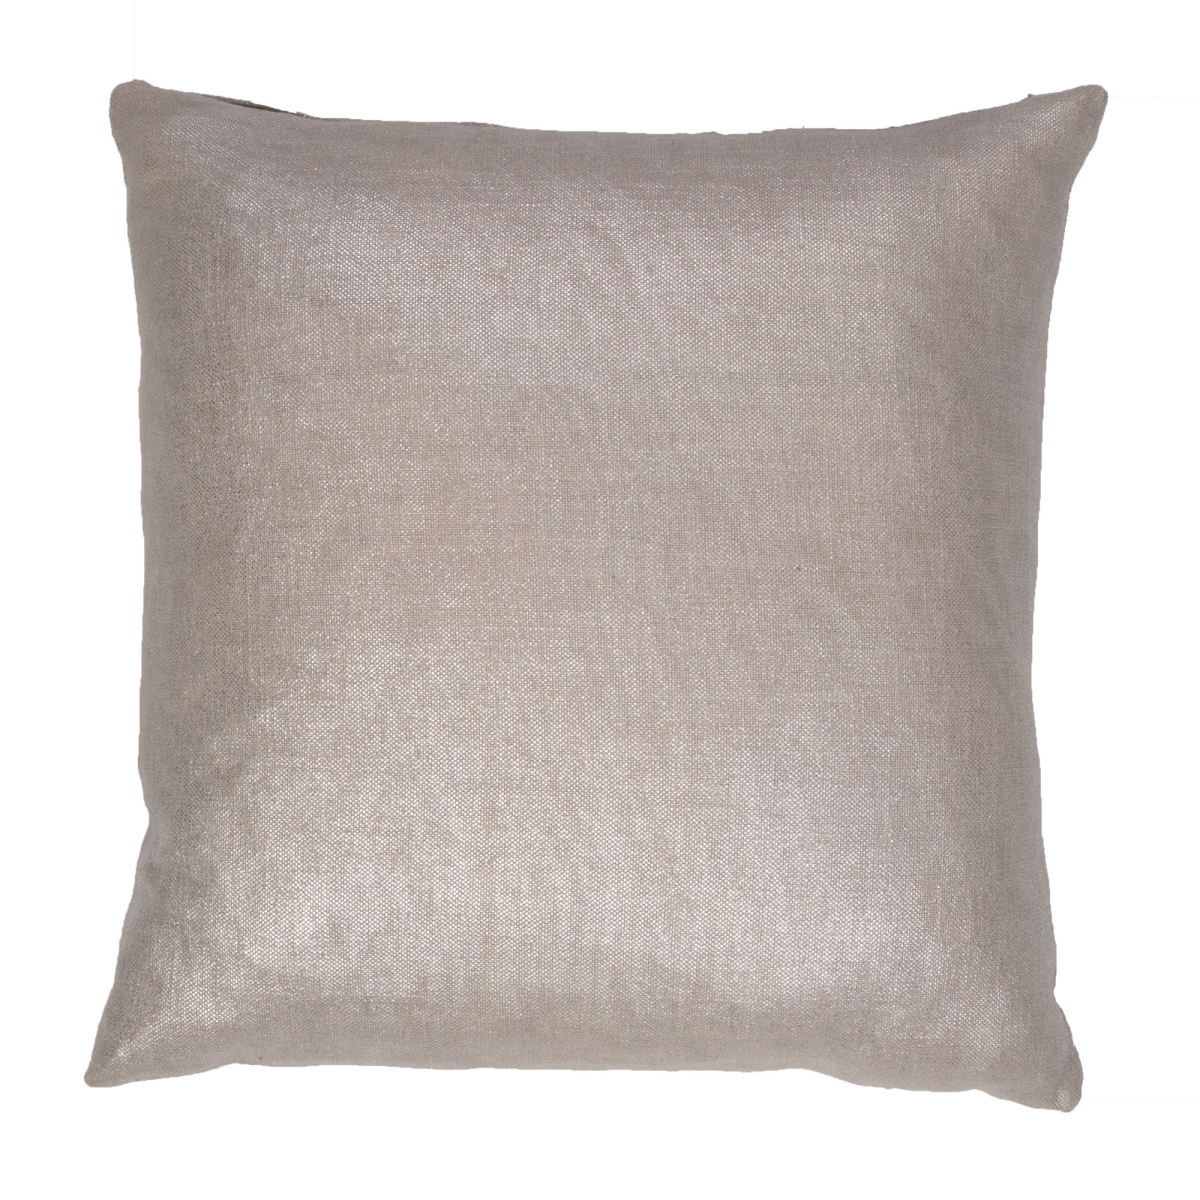 Plw102181 18 X 18 In. Shimmer Pillow Glitter Silver & Gray Solid Poly Throw Pillow